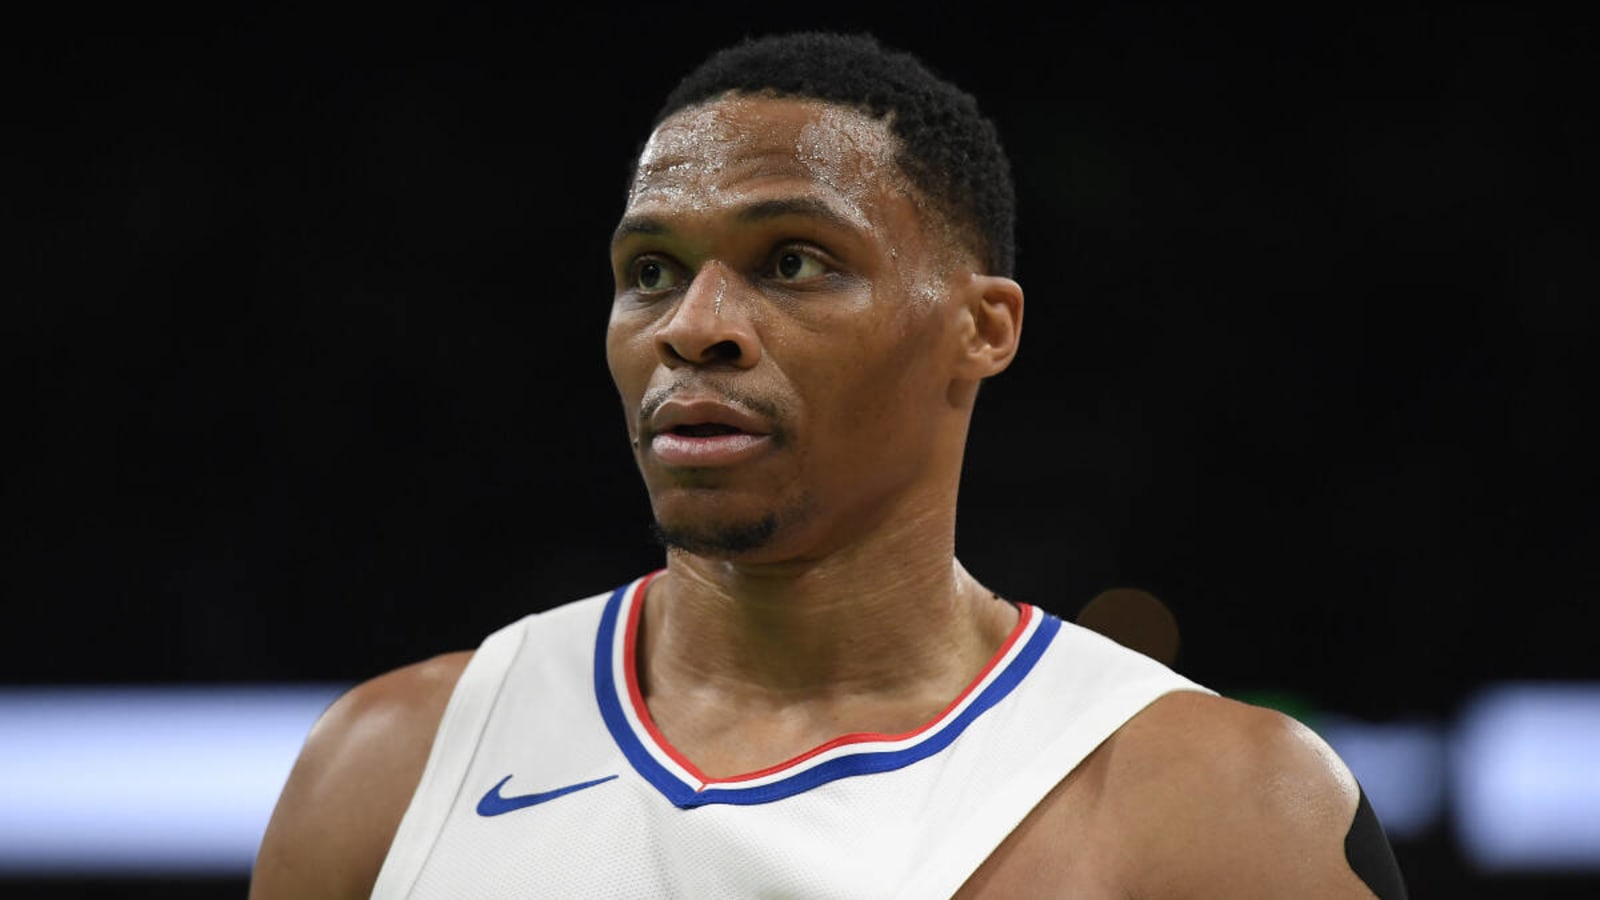 Russell Westbrook Shares What He Will Tell His Clippers Teammates As A Leader After Another Embarrassing Loss